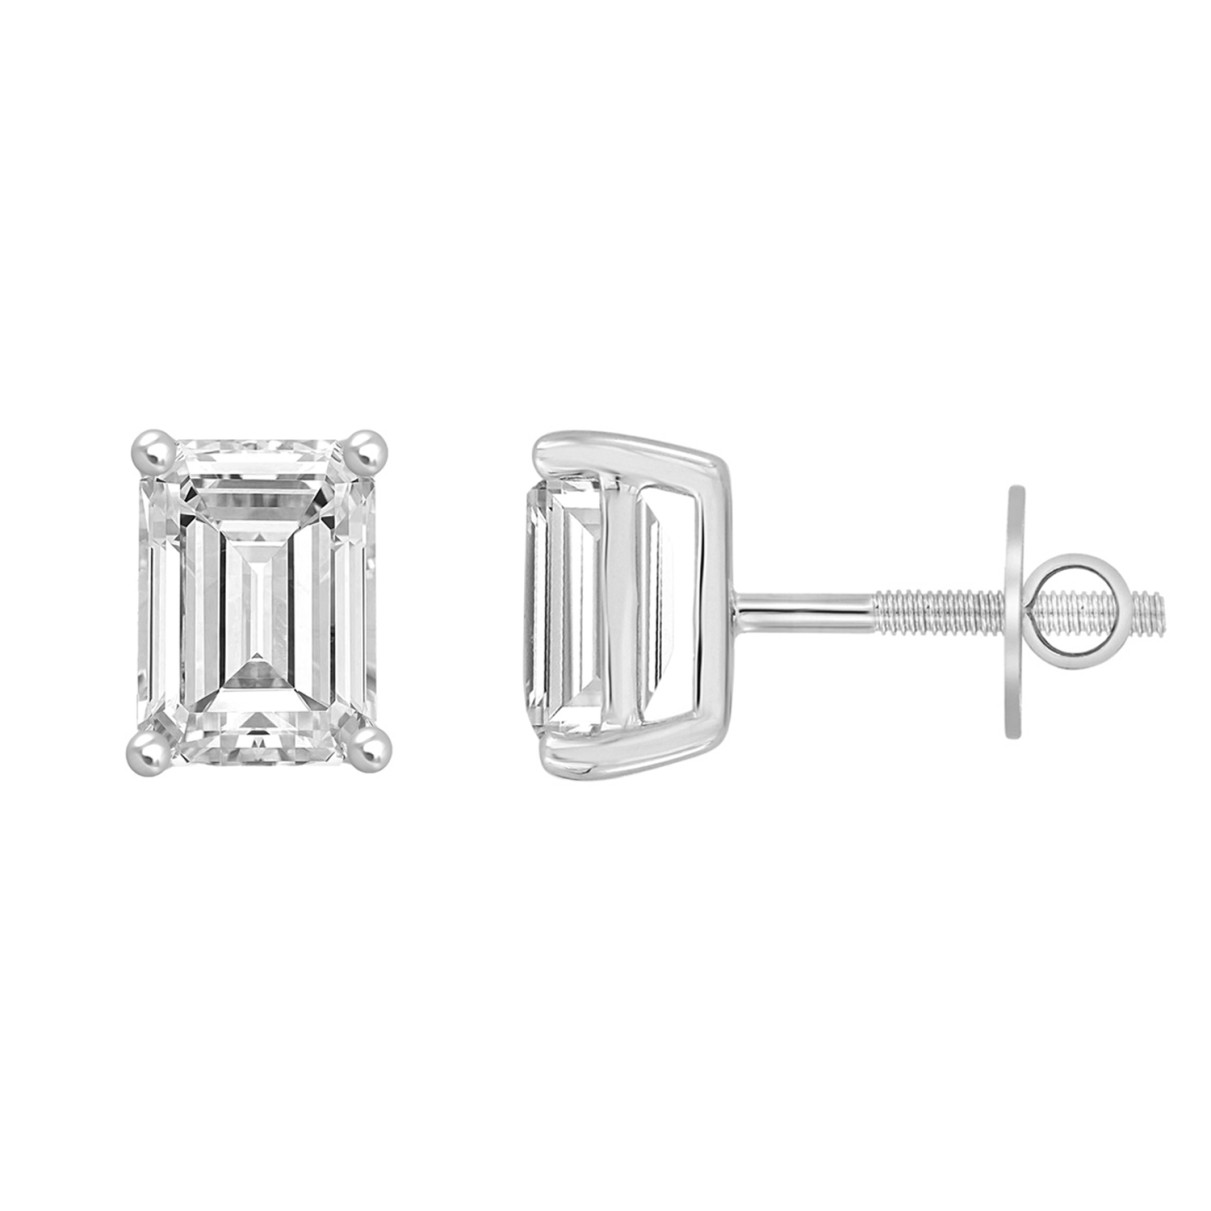 LADIES SOLITAIRE EARRINGS  1 1/2CT EMERALD DIAMOND 14K WHITE GOLD